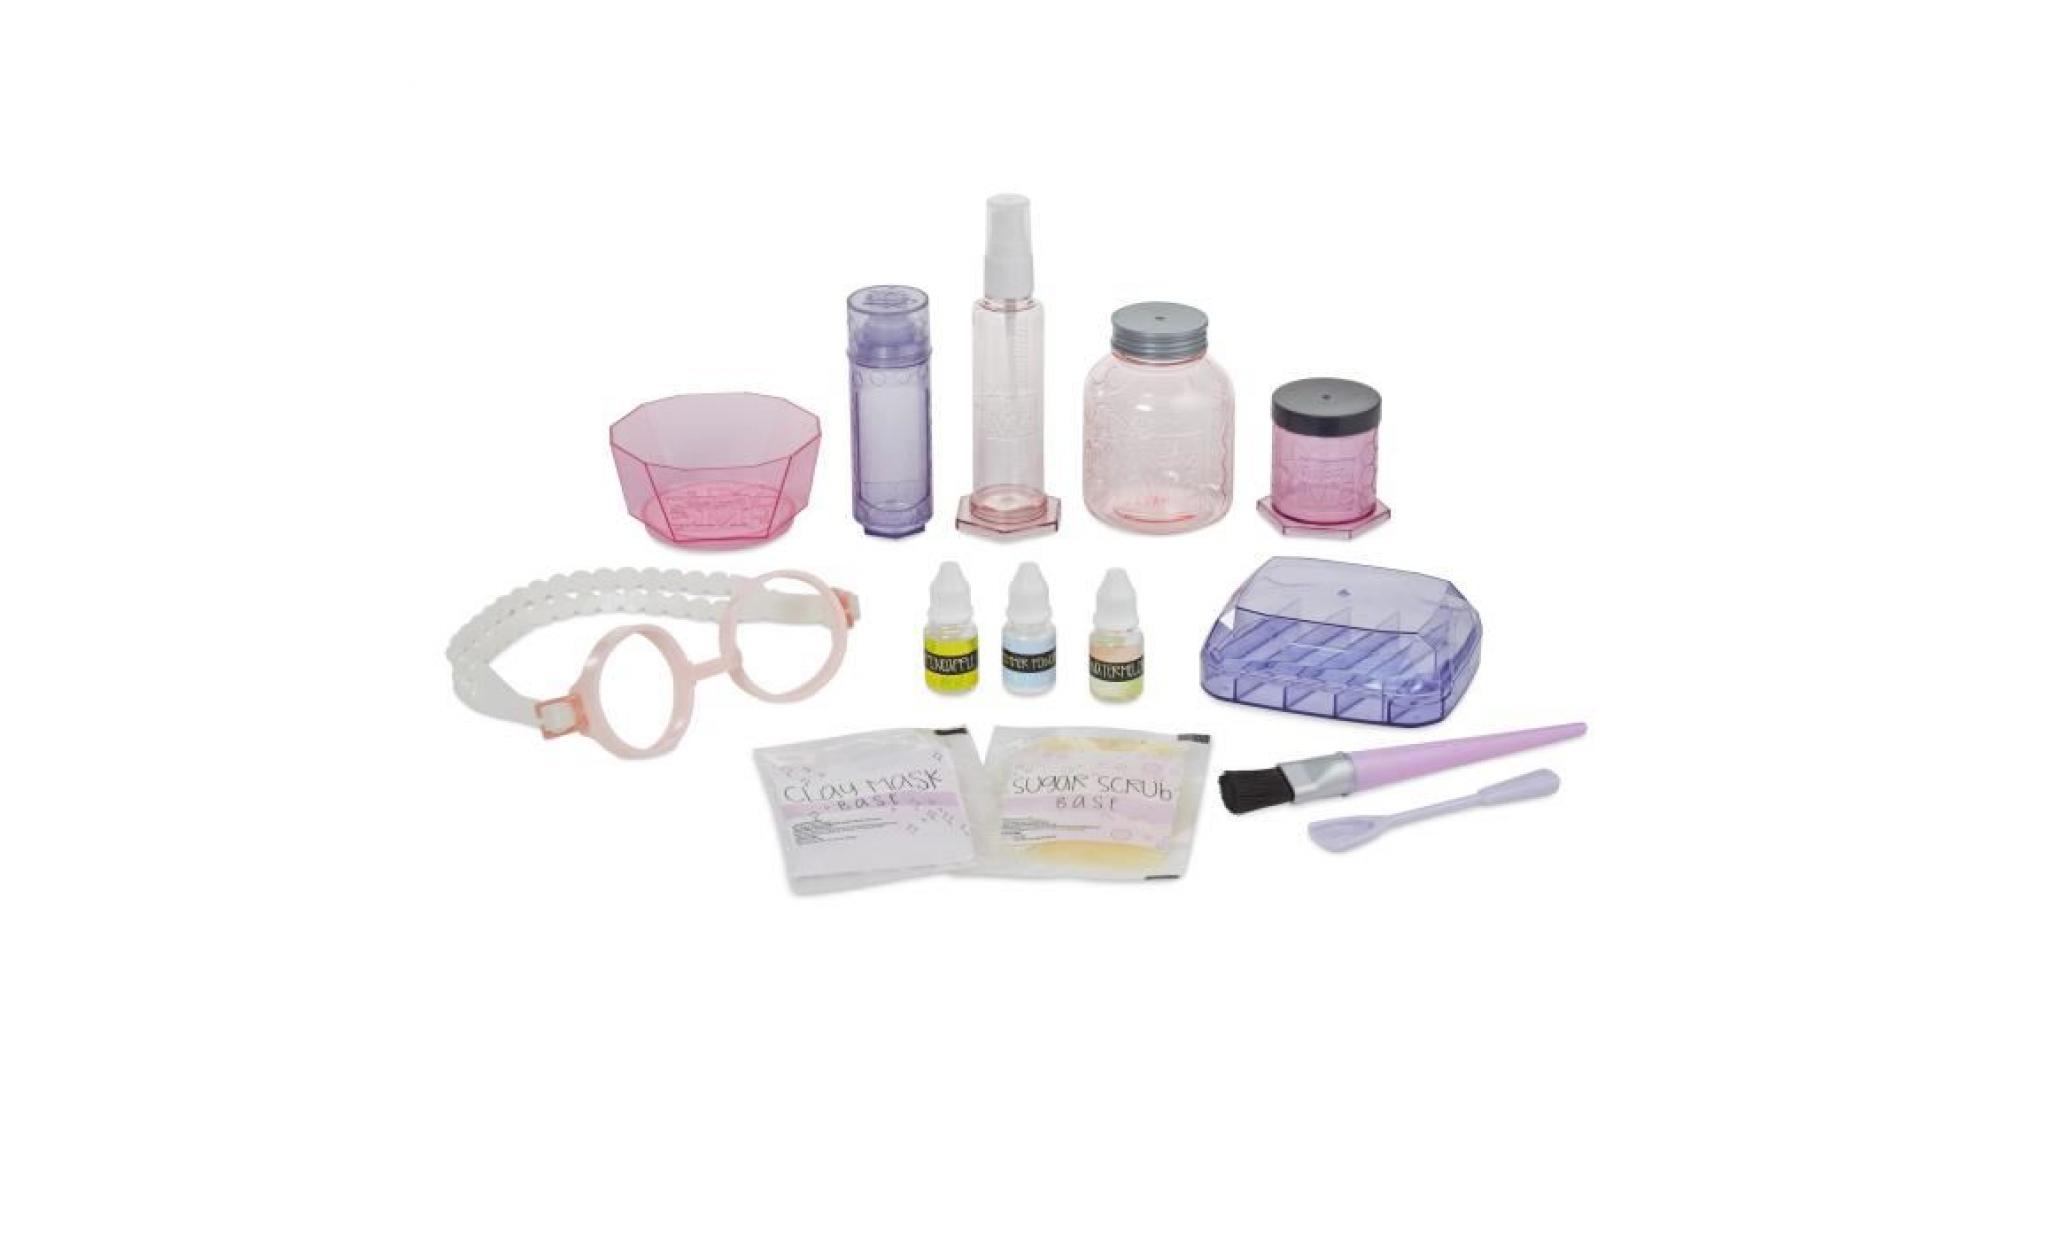 slumber party science kit to create your own spa treatments 1k2aaf pas cher